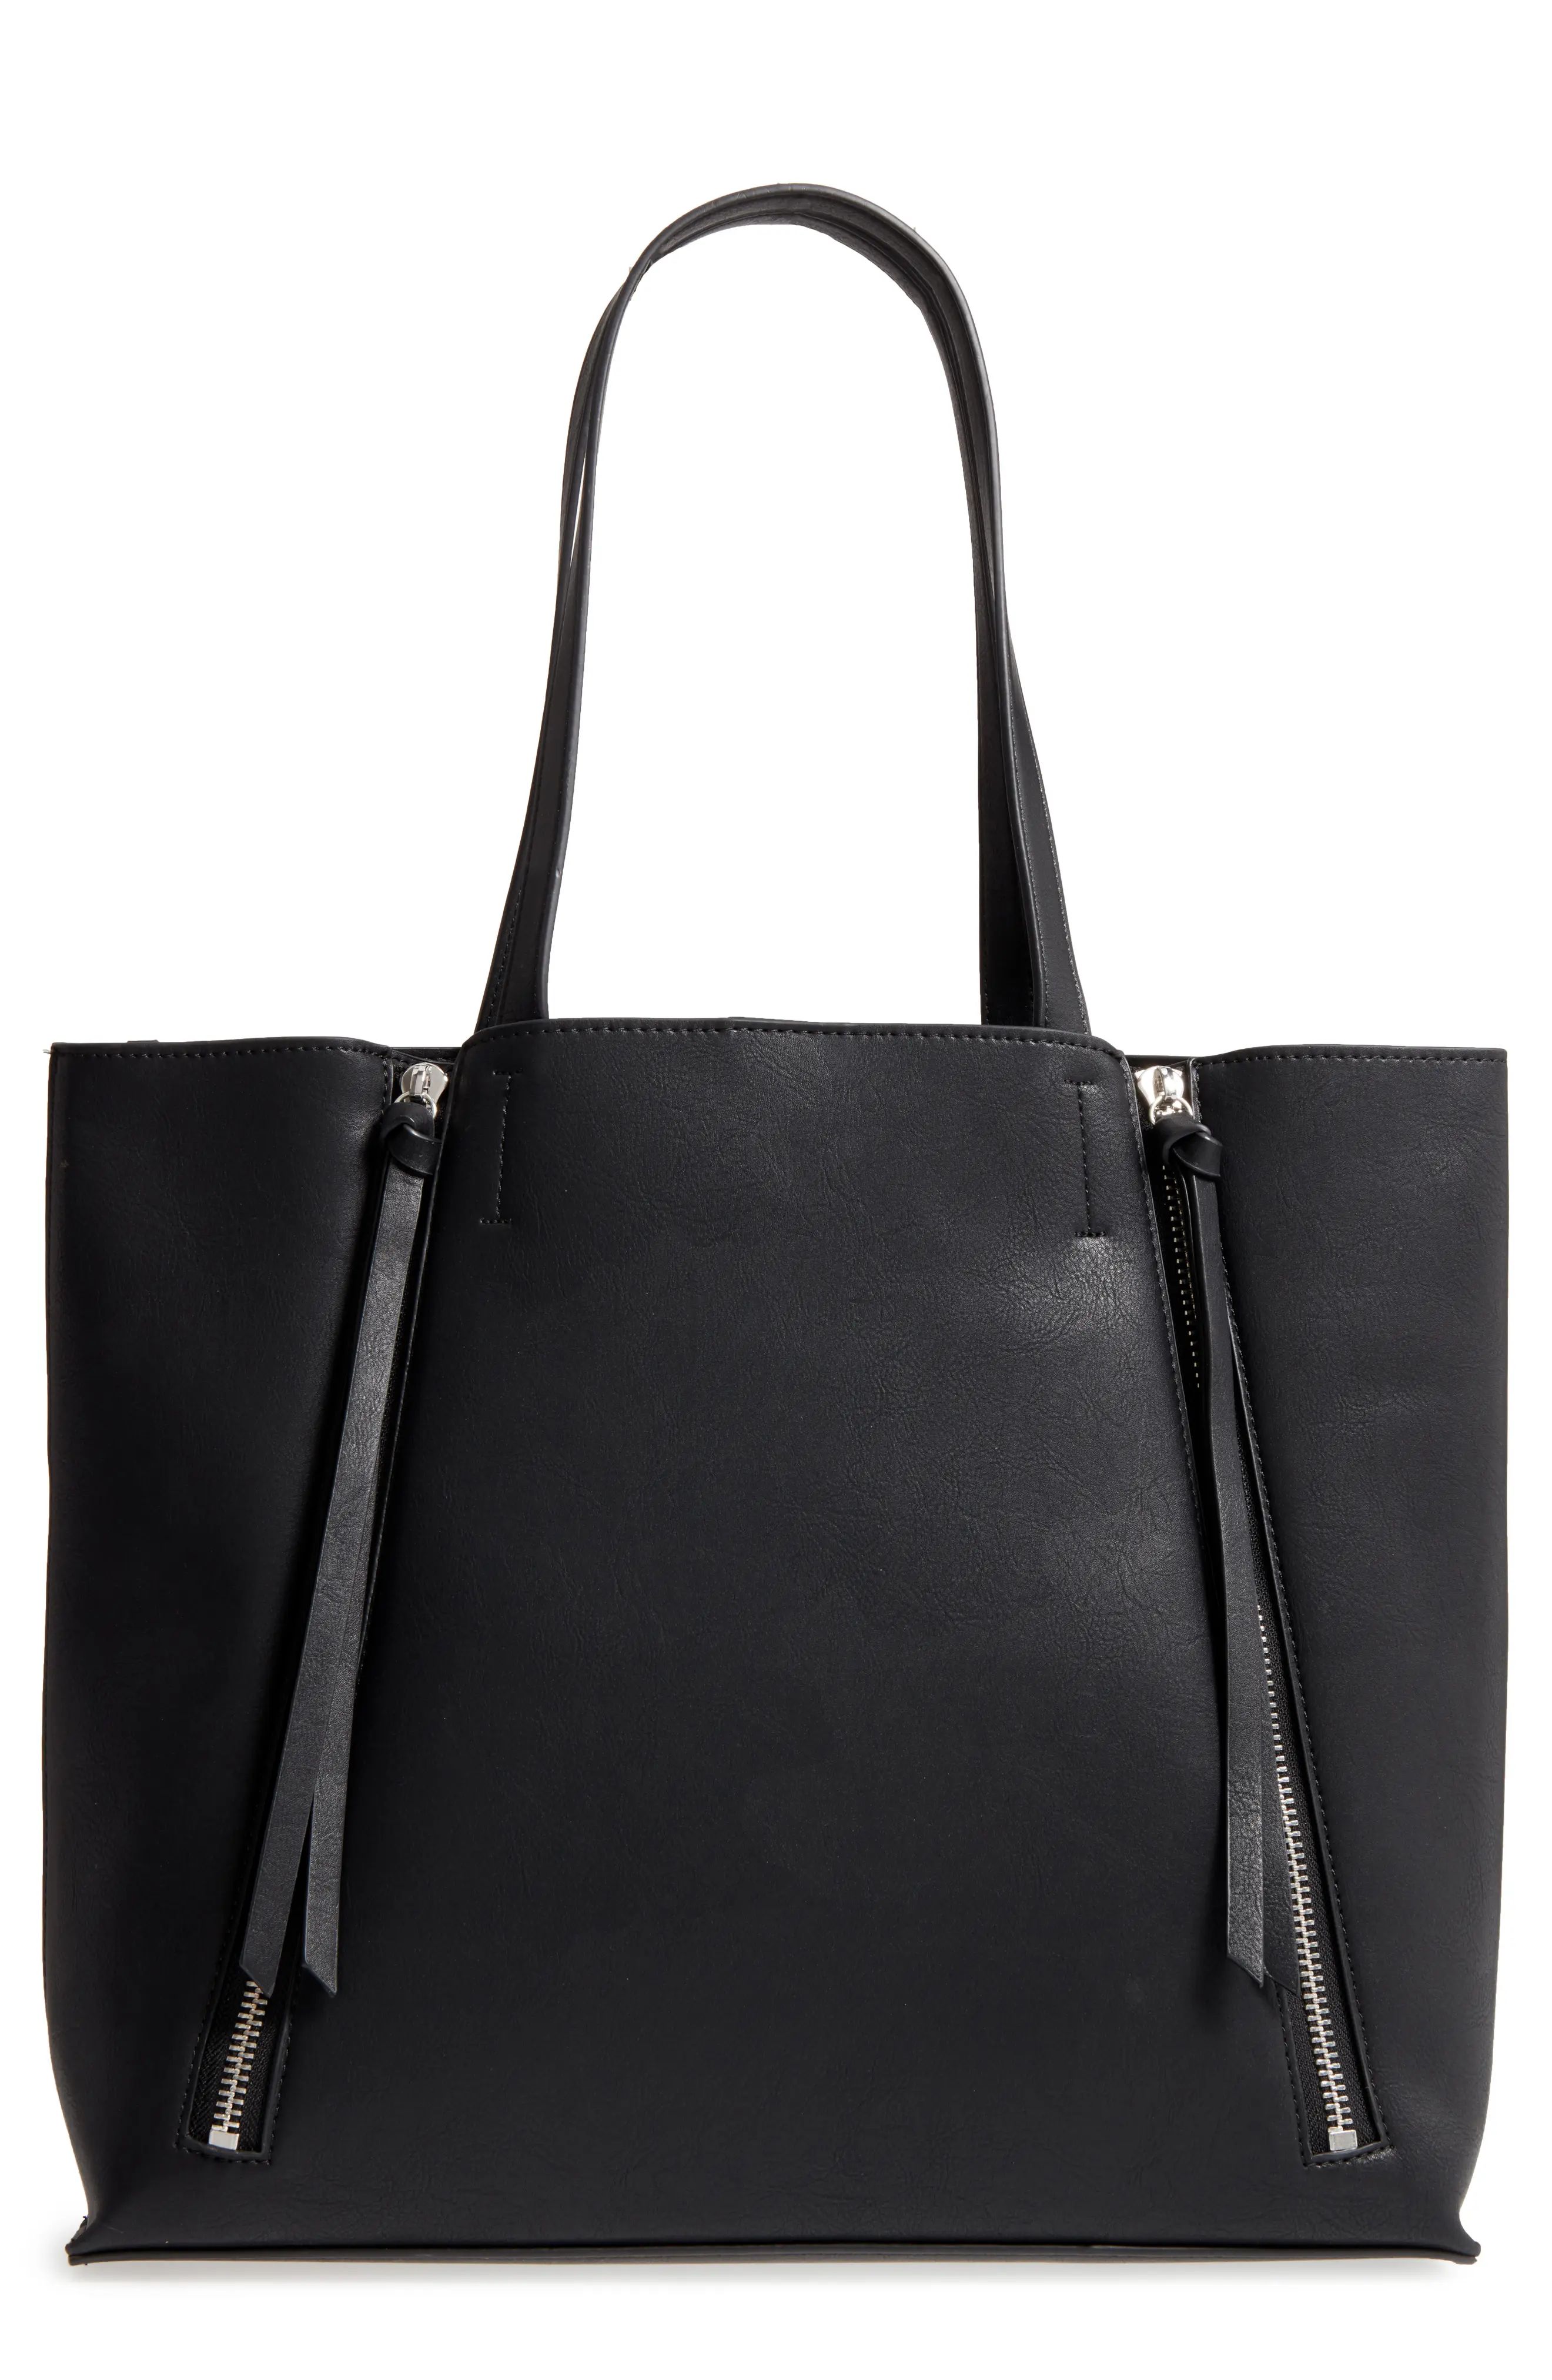 Chelsea28 Leigh Faux Leather Tote & Zip Pouch | Nordstrom